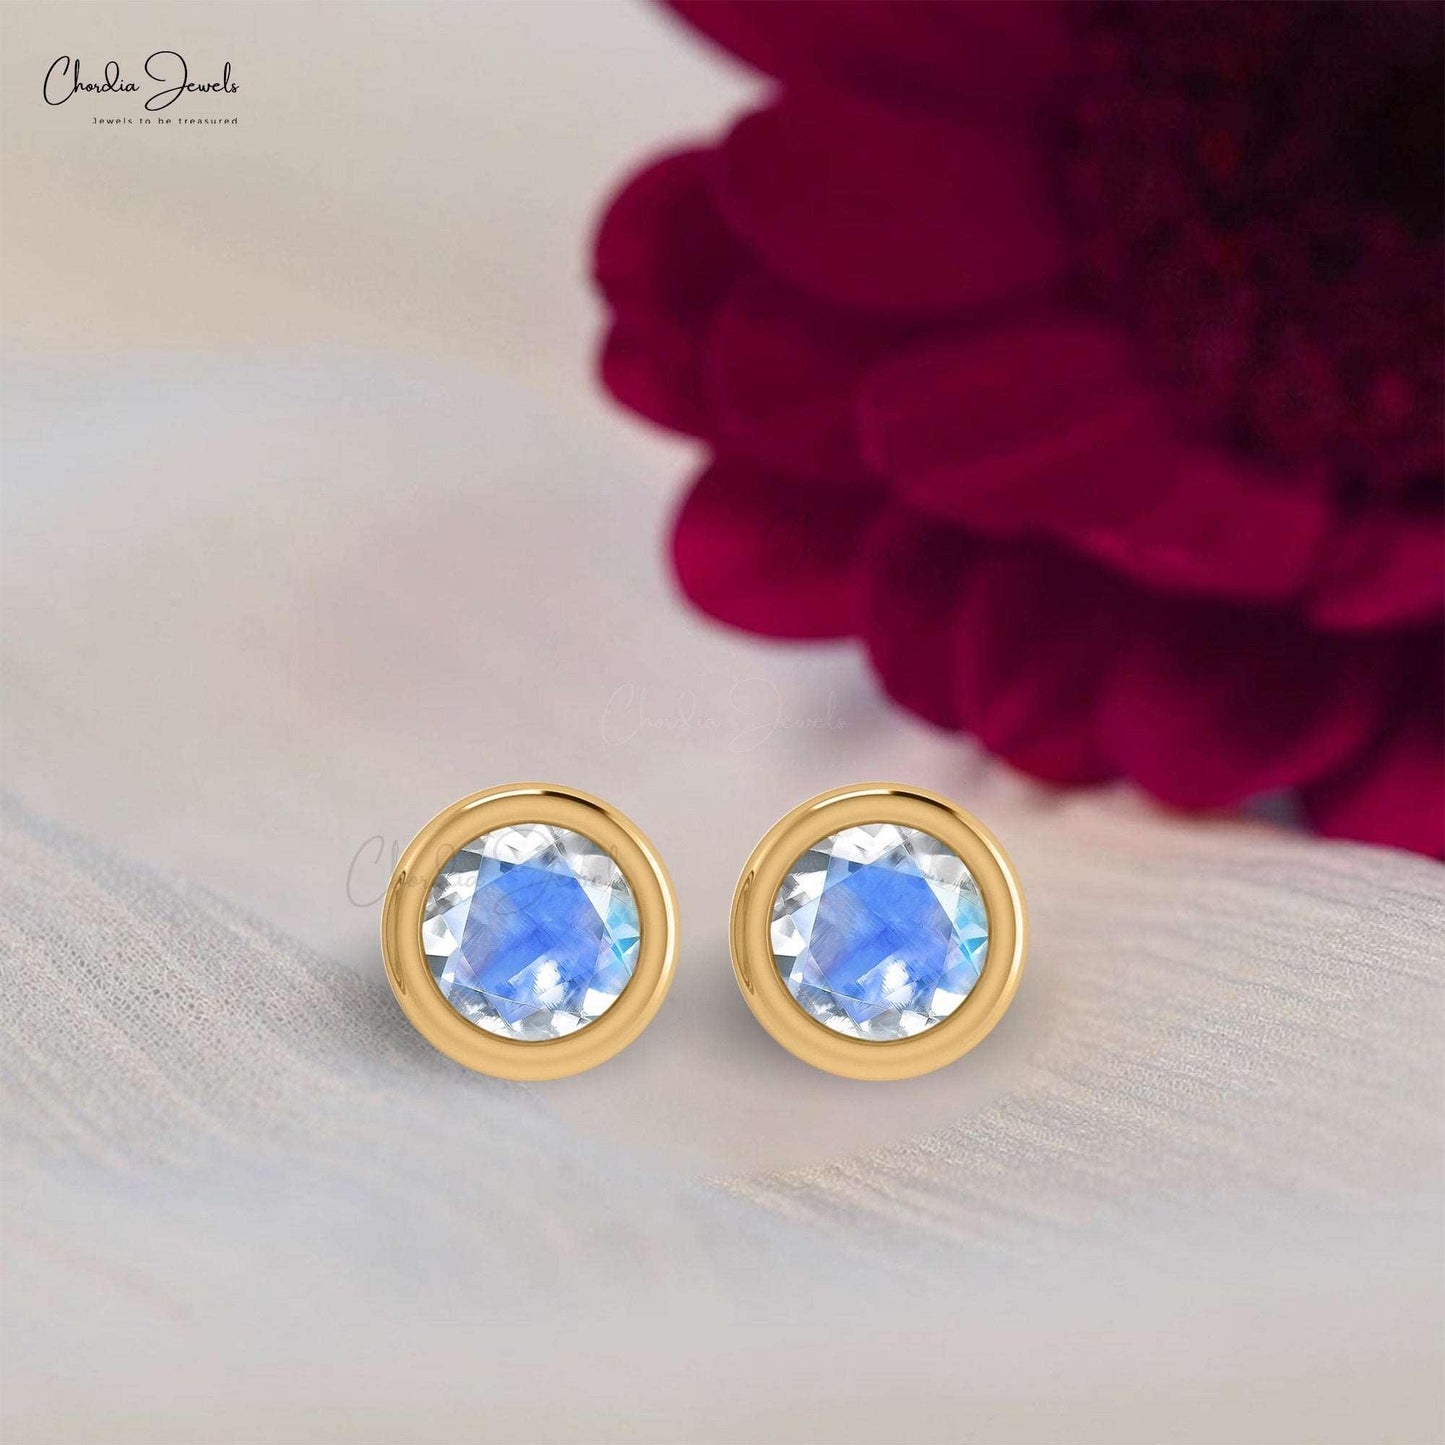 Load image into Gallery viewer, 0.28 Carats Round Rainbow Moonstone Solitaire Stud Earrings In 14k Solid Gold - Chordia Jewels
